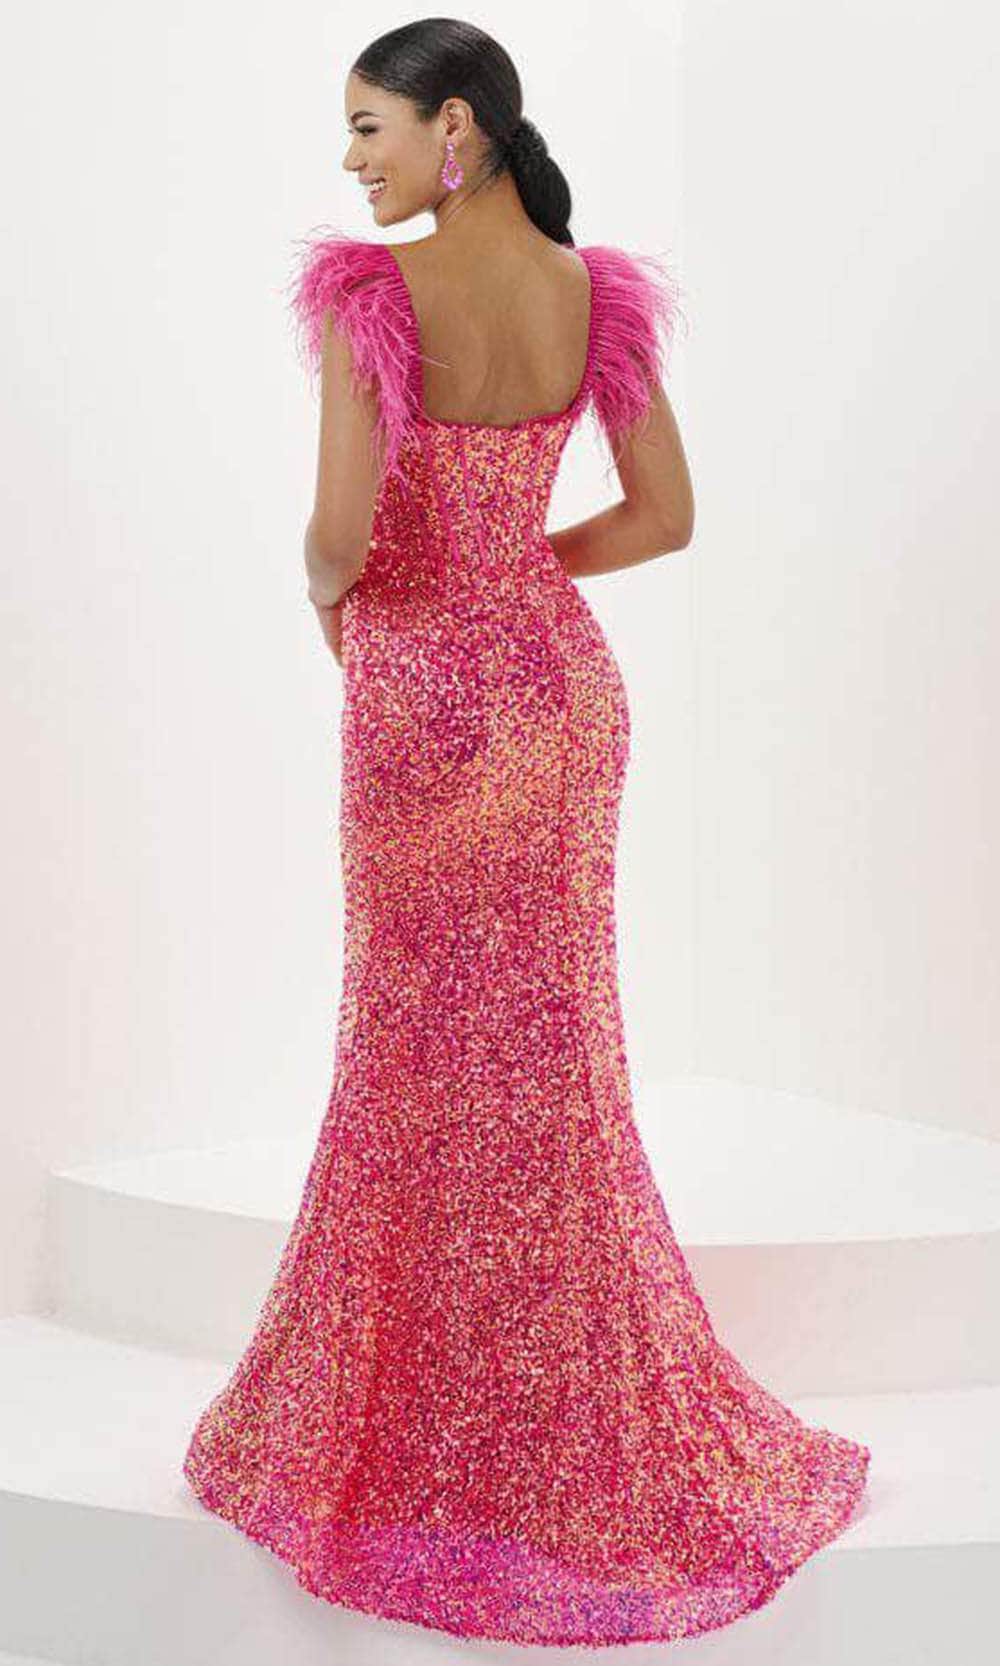 Tiffany Designs 16106 - Sweetheart Feather Sleeve Evening Gown Evening Dresses